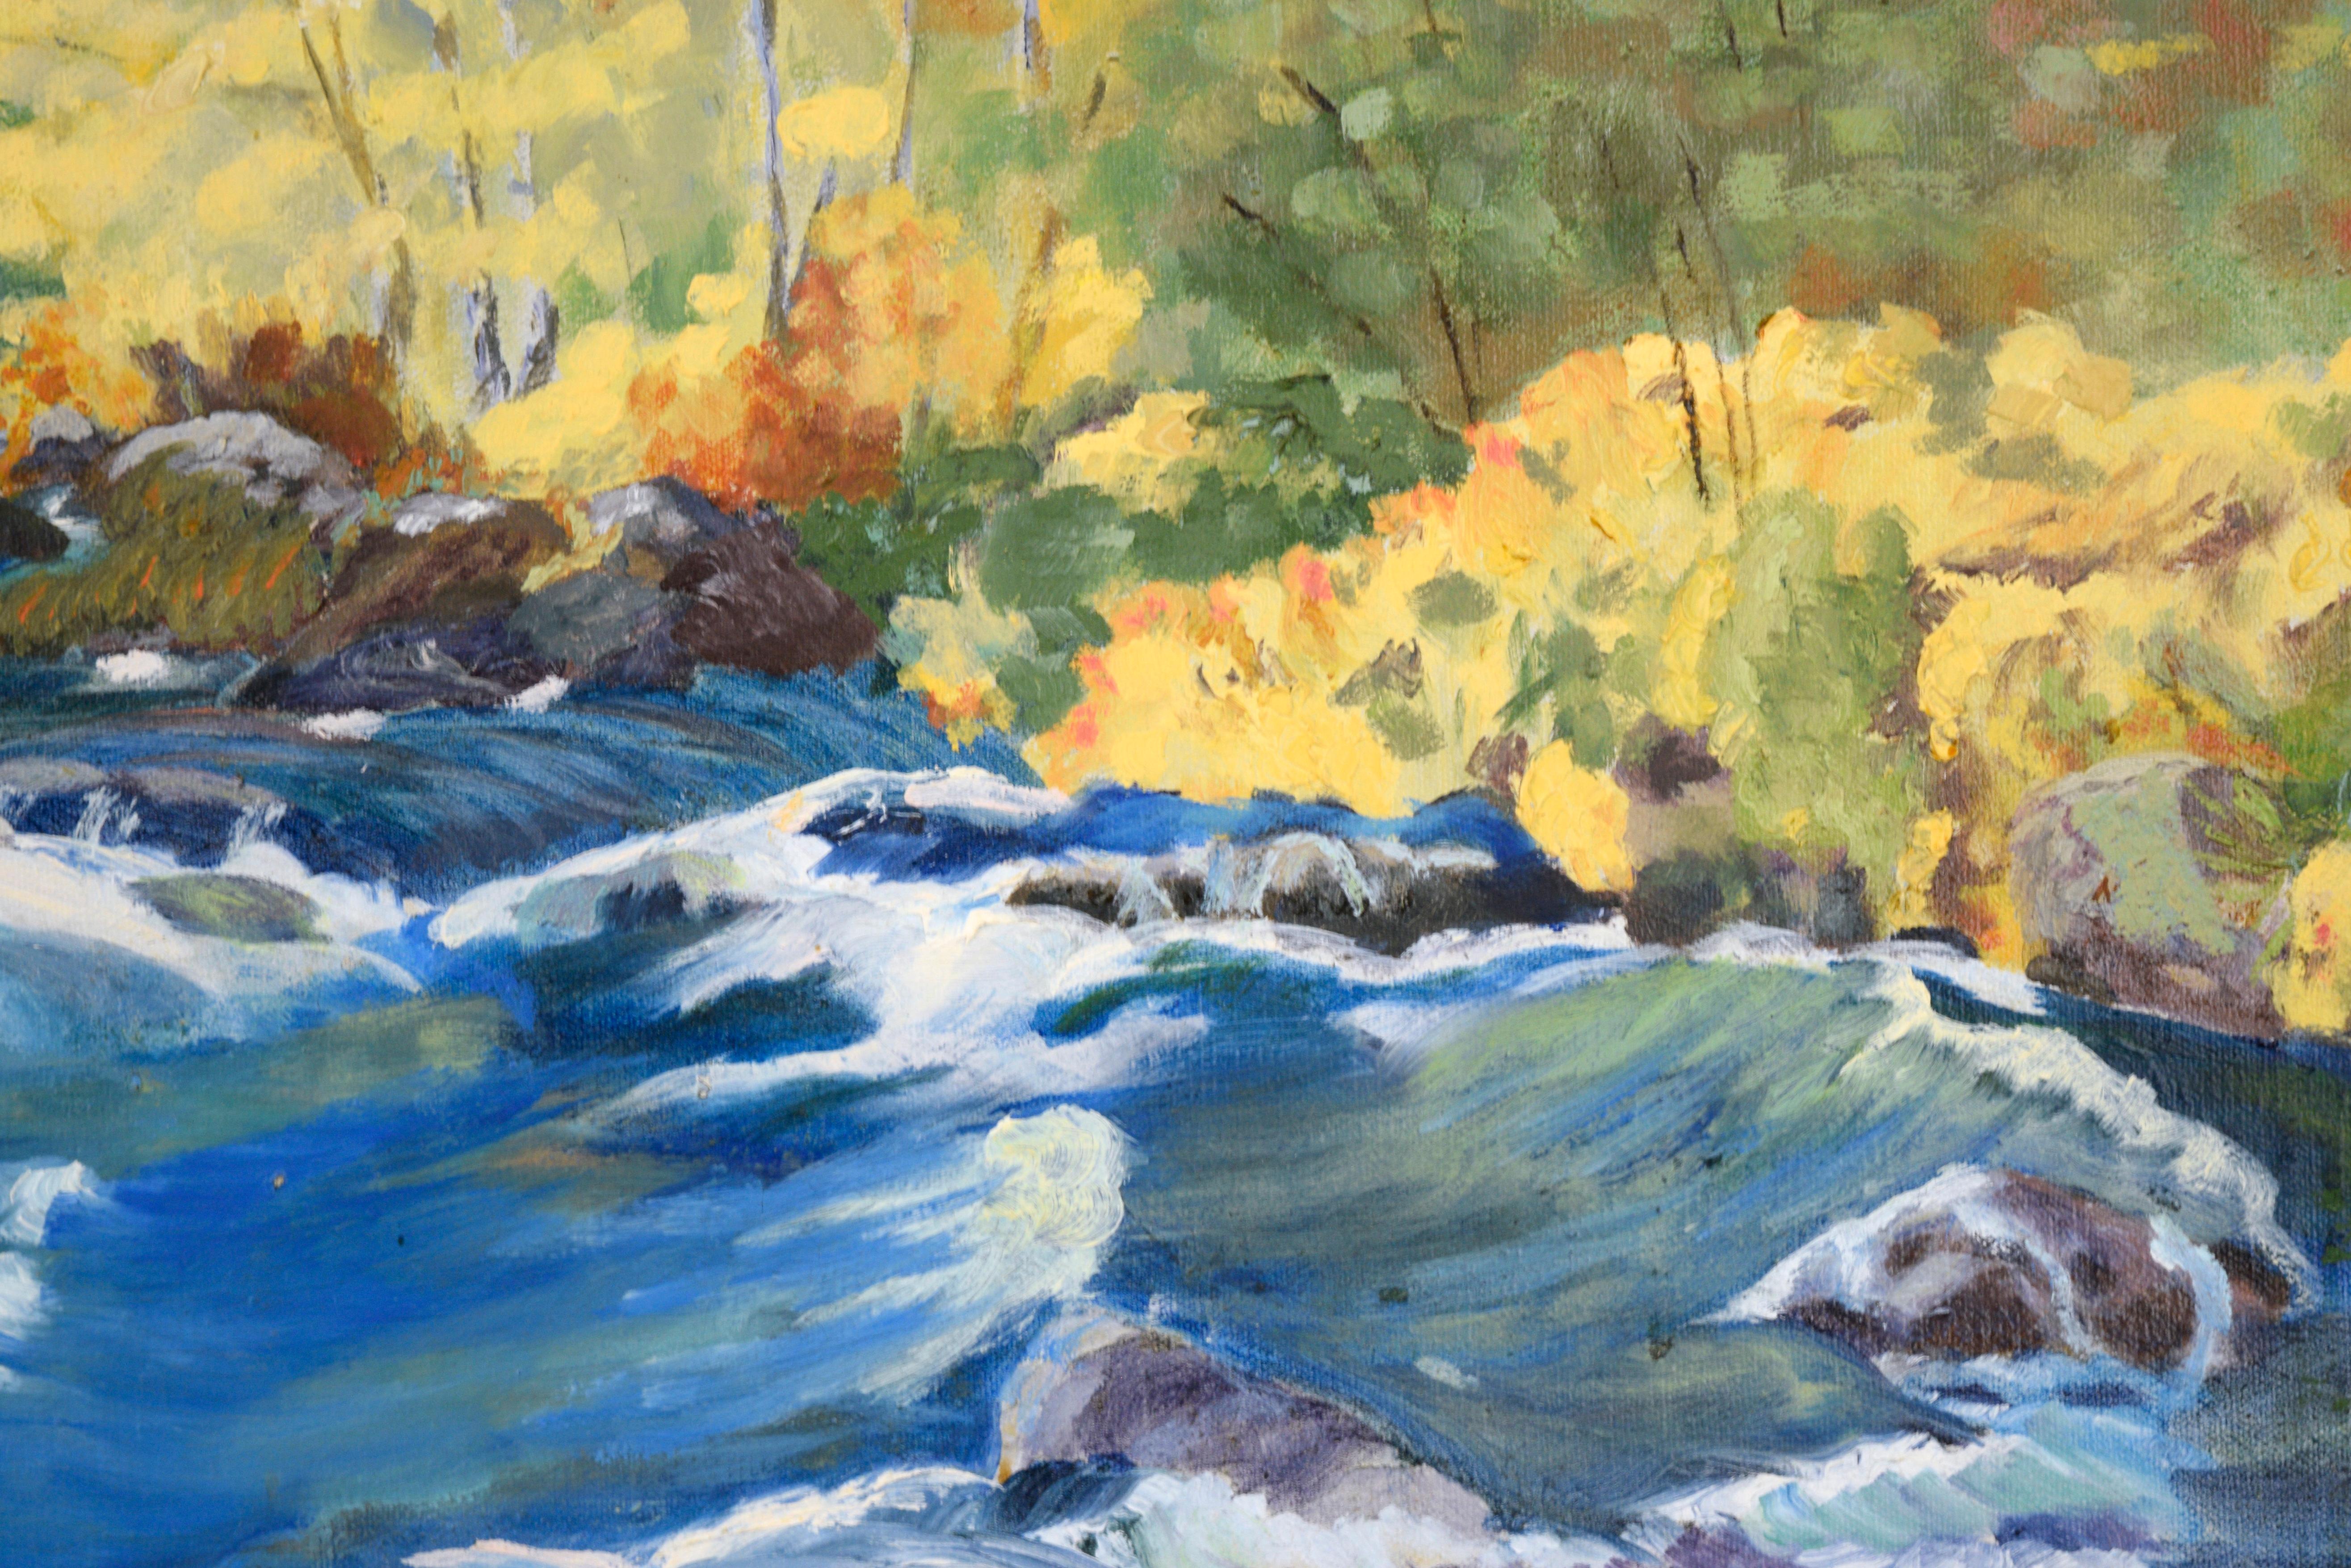 Gorgeous and vibrant landscape of California Sierra's babbling brook during autumn by California artist Edith P. May (American, 20th-C), c. 1959. Signed lower right corner. Presented in carved wooden frame. Image size: 24